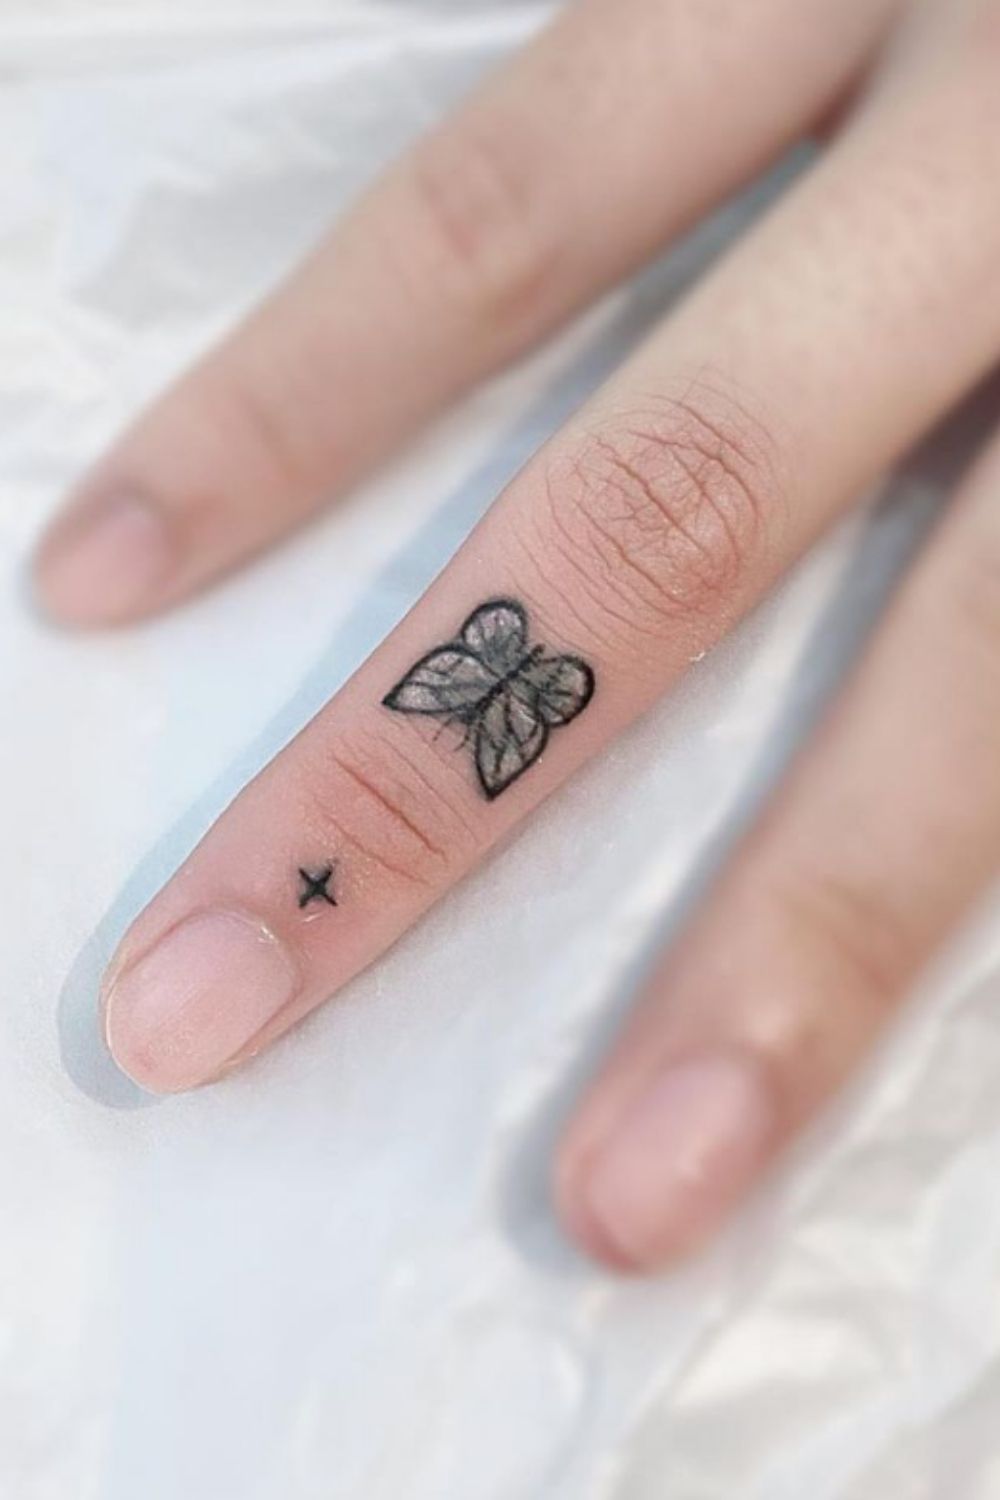 40+ Beautiful butterfly tattoo ideas unique for female